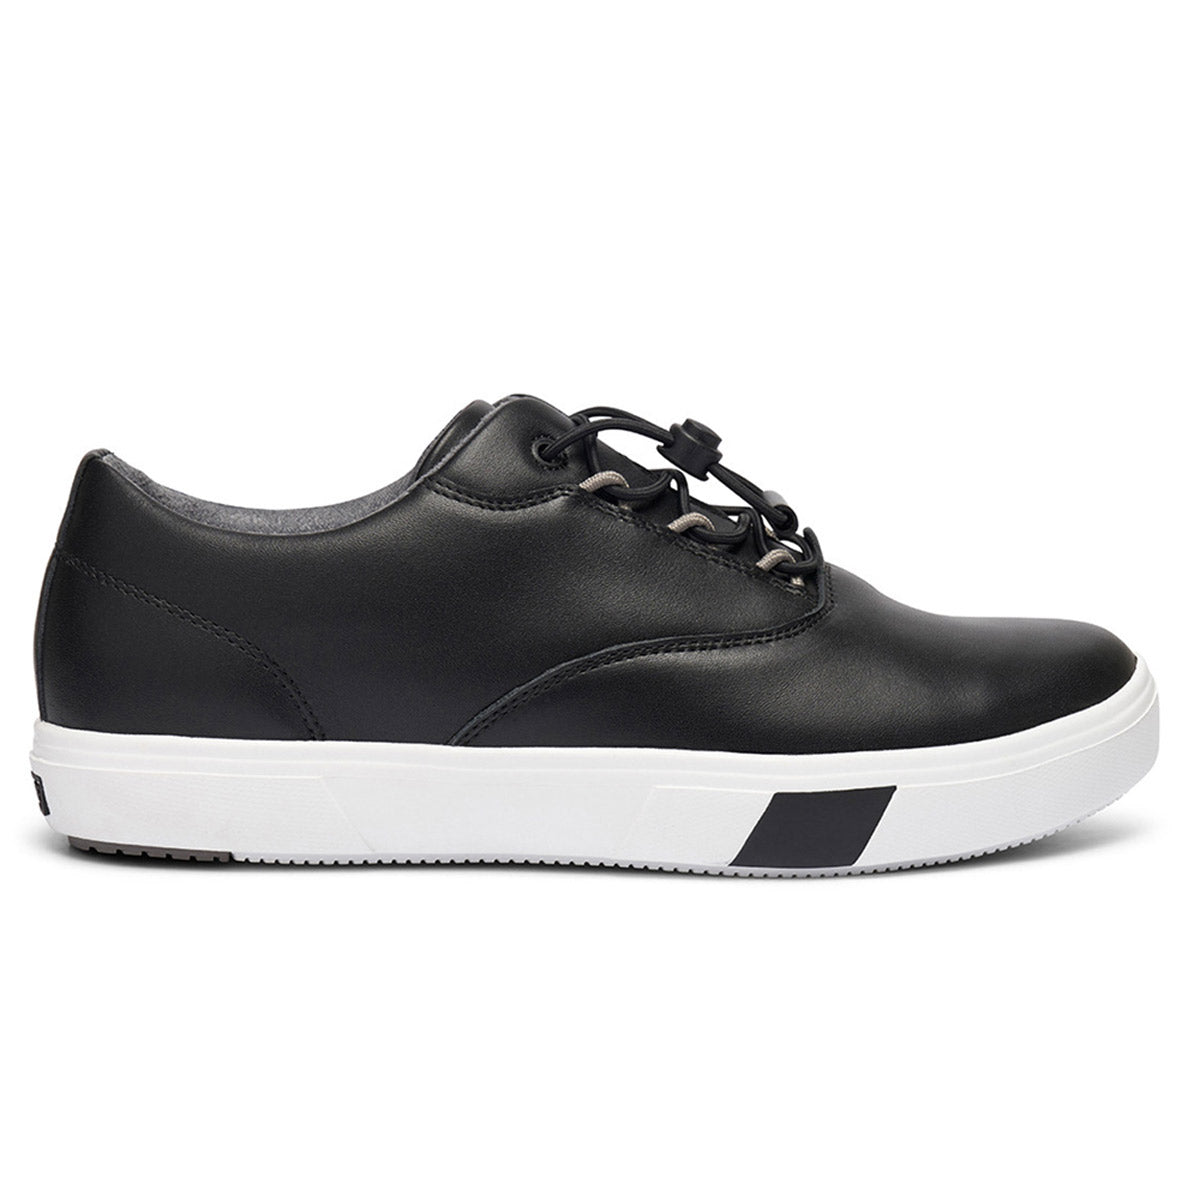 Anodyne Black Nappa leather lace-up sneaker with white sole.